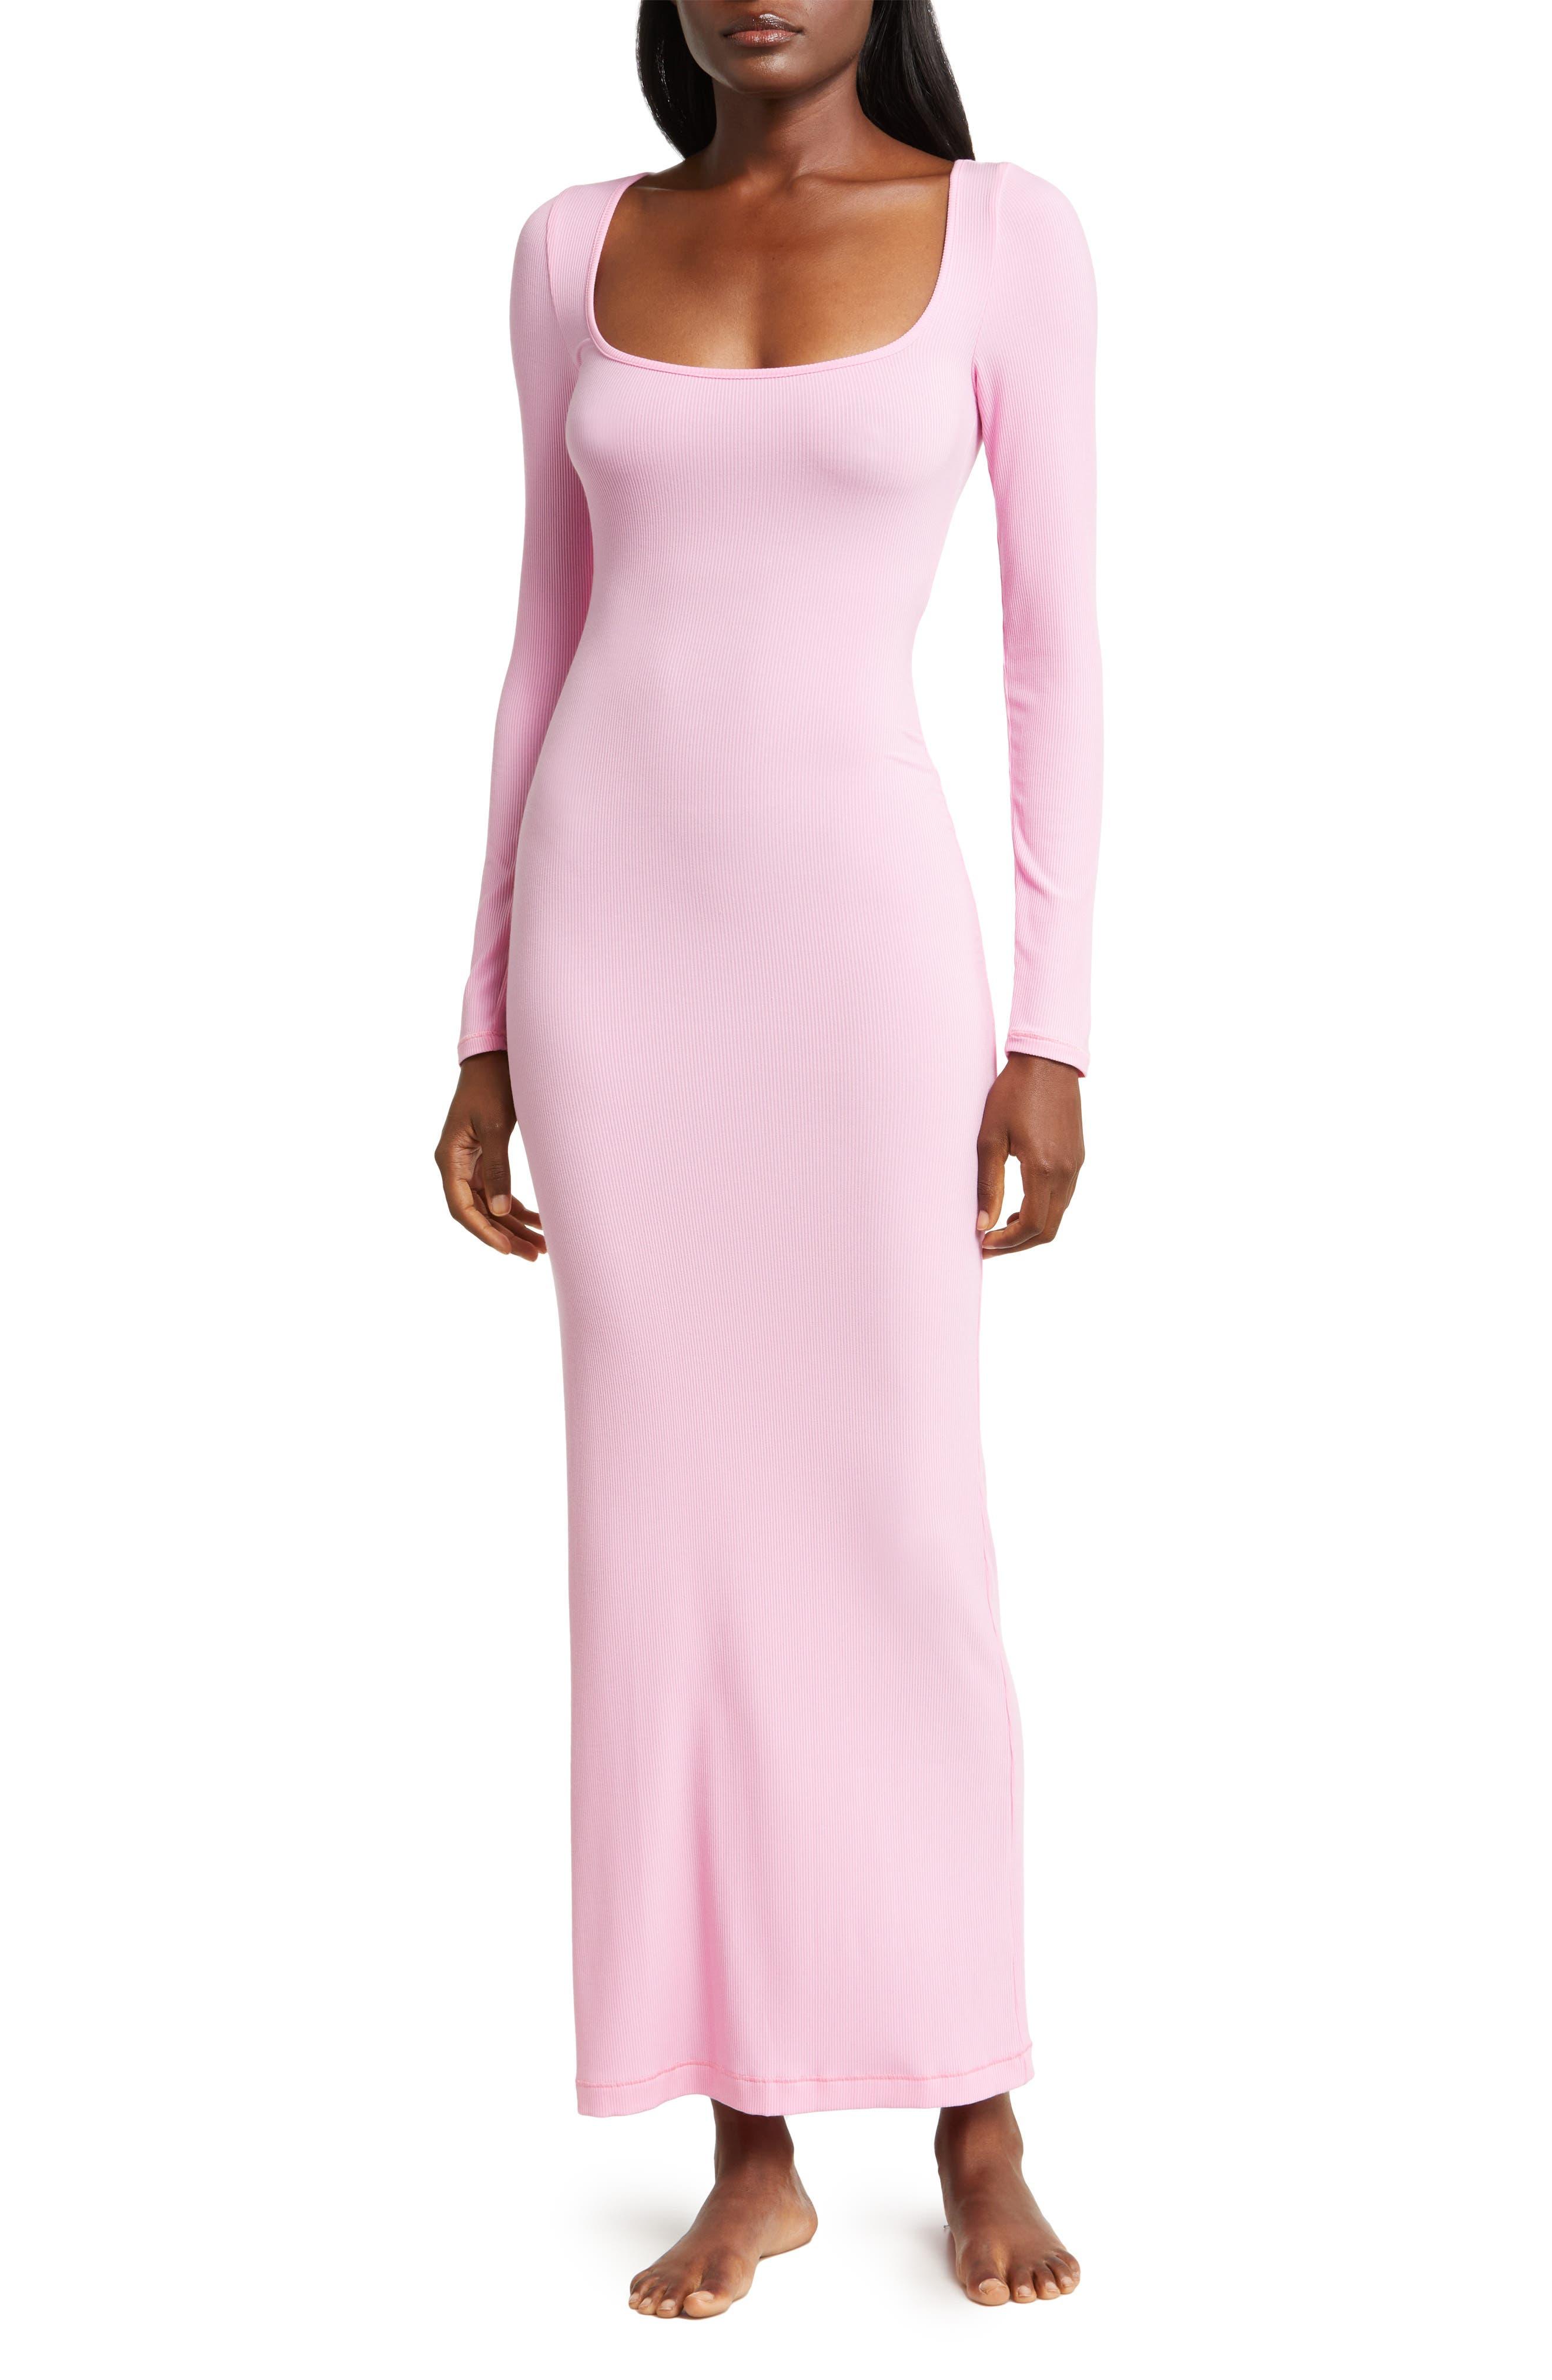 Skims Soft Lounge Long Sleeve Dress in Pink